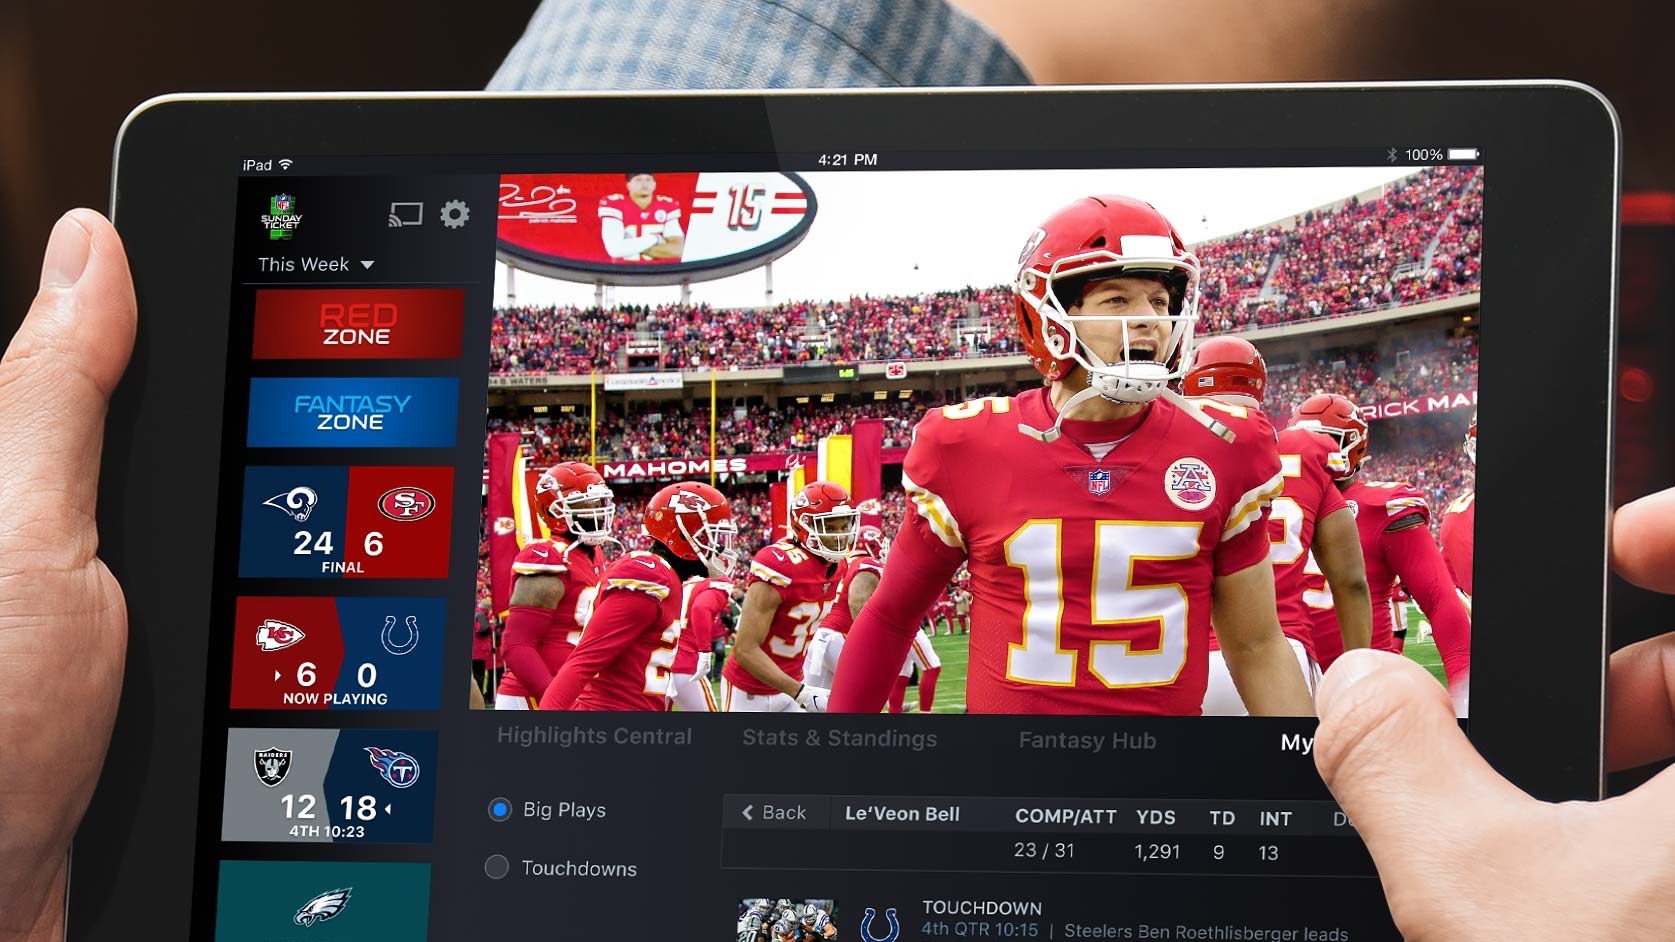 How To Watch NFL Games On My Tablet